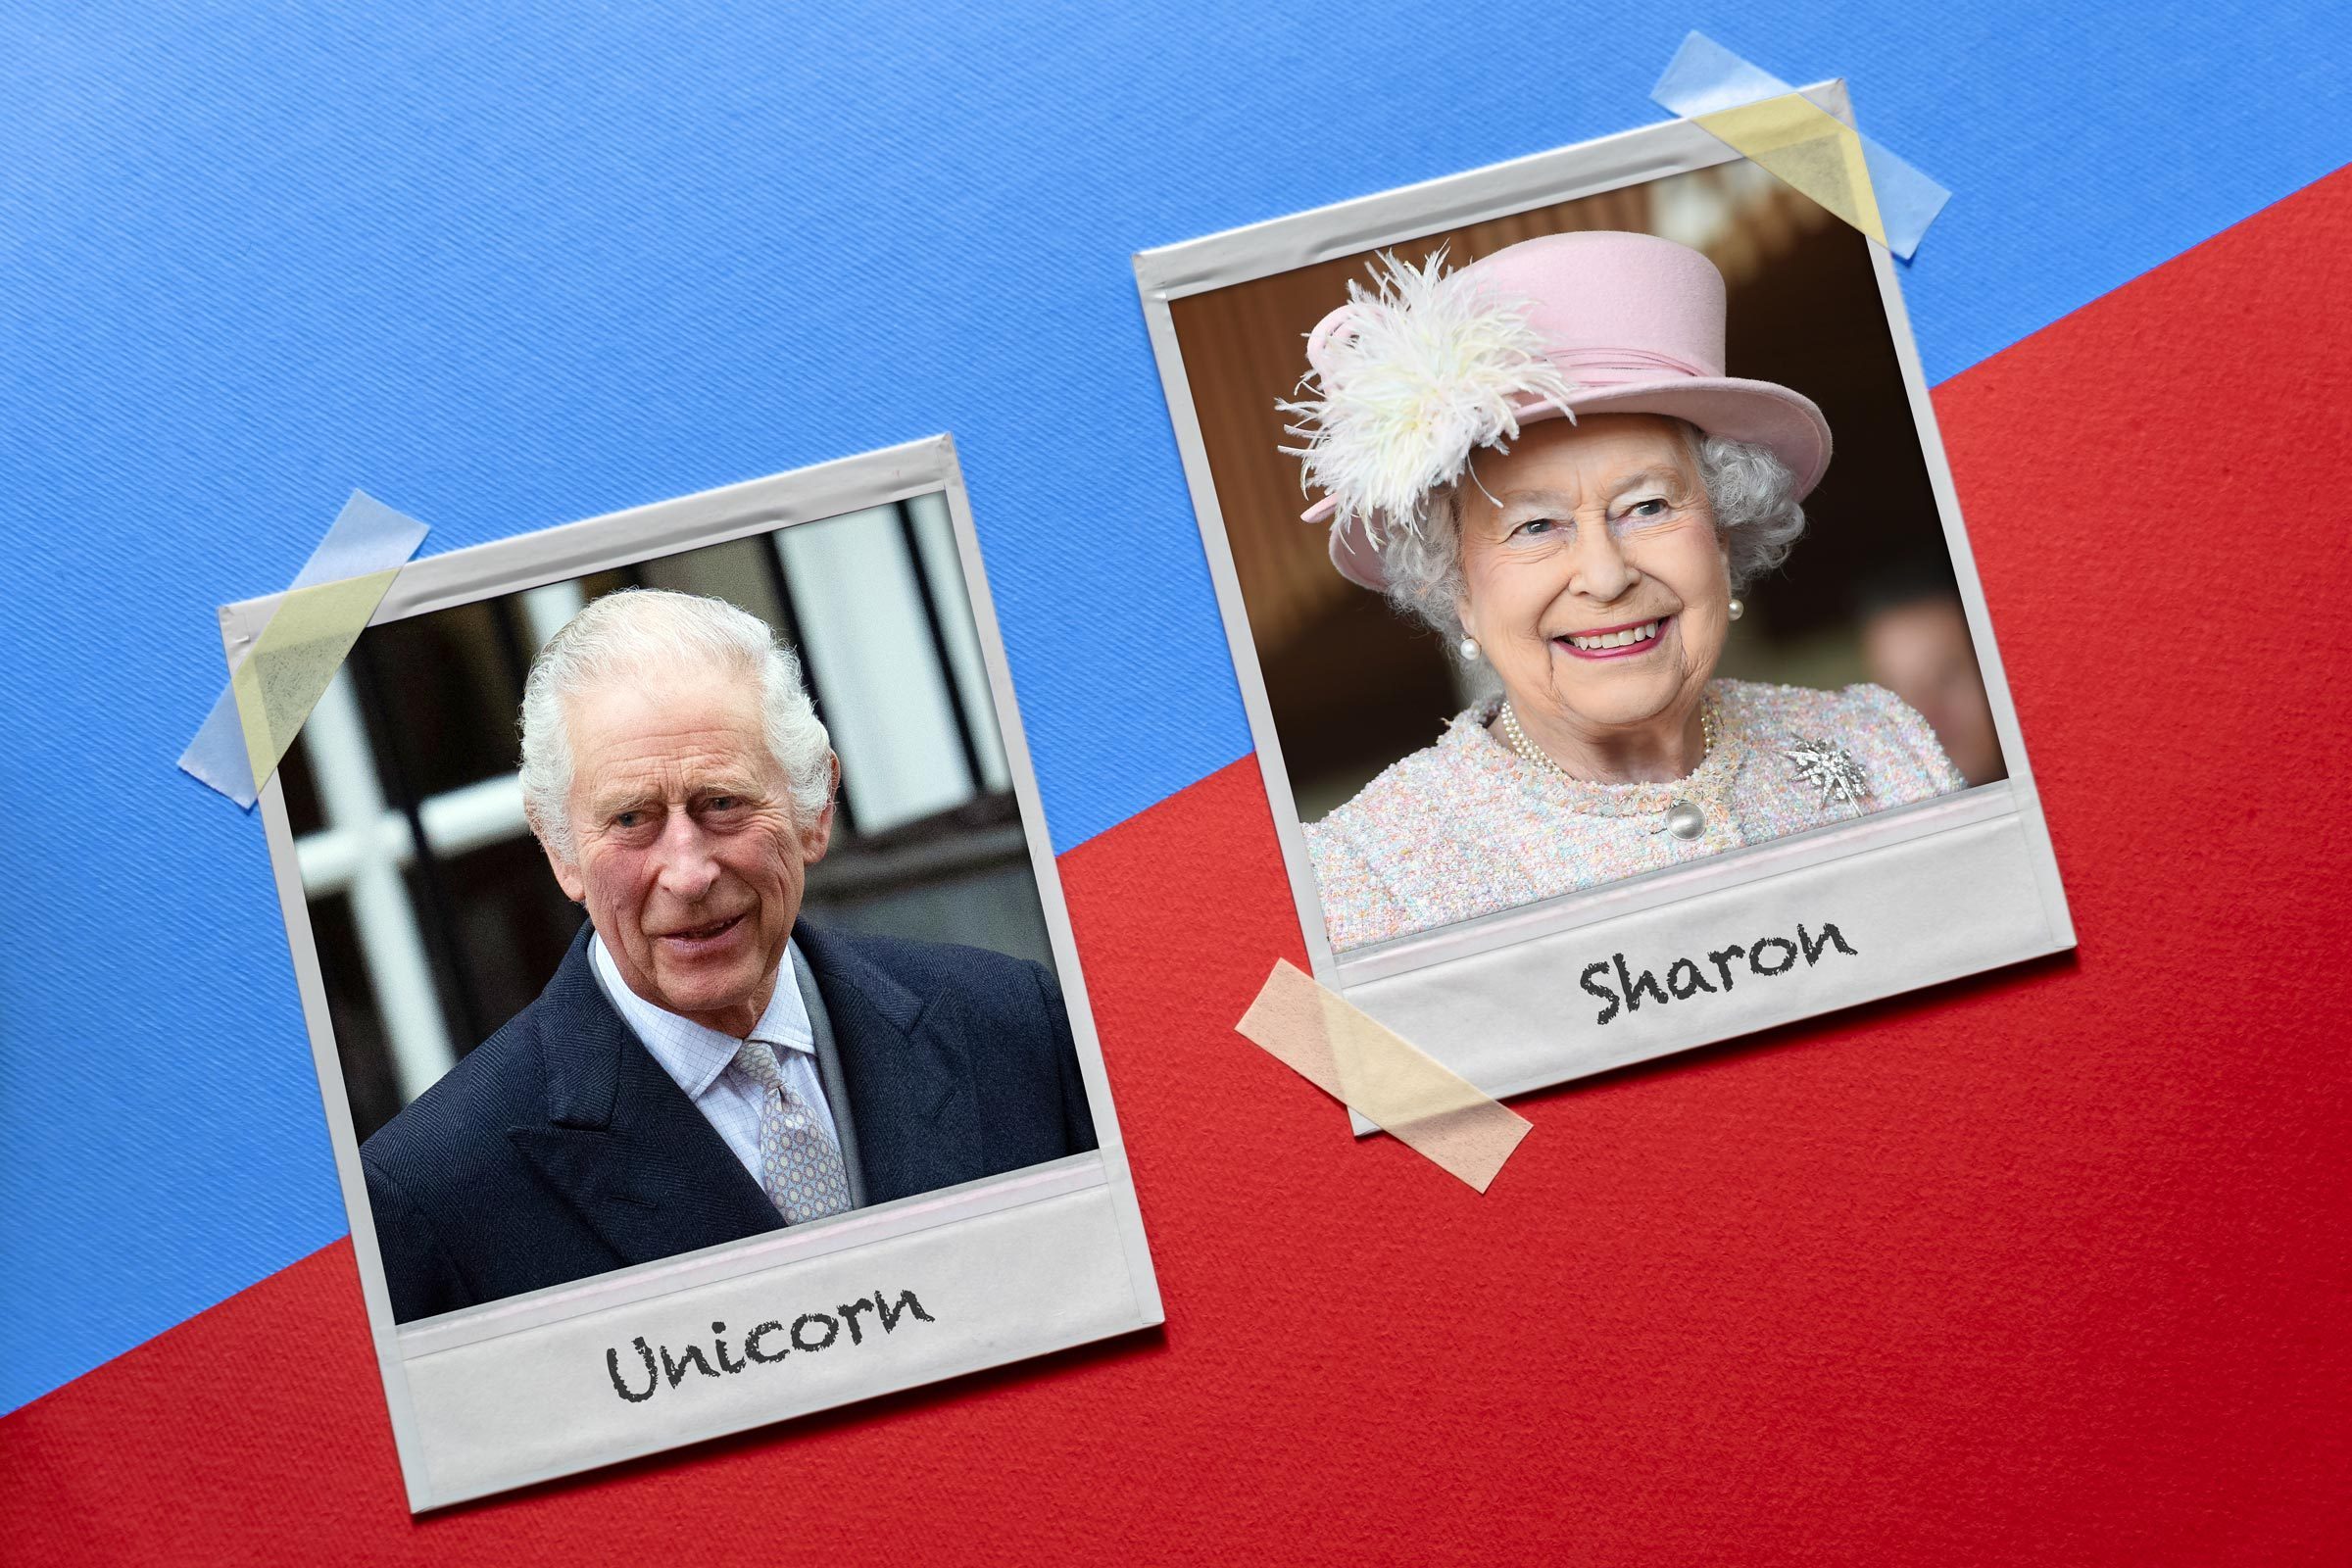 Polaroid pictures with King Charles and queen Elizabeth II labeled with their code names, "unicorn" and "sharon"